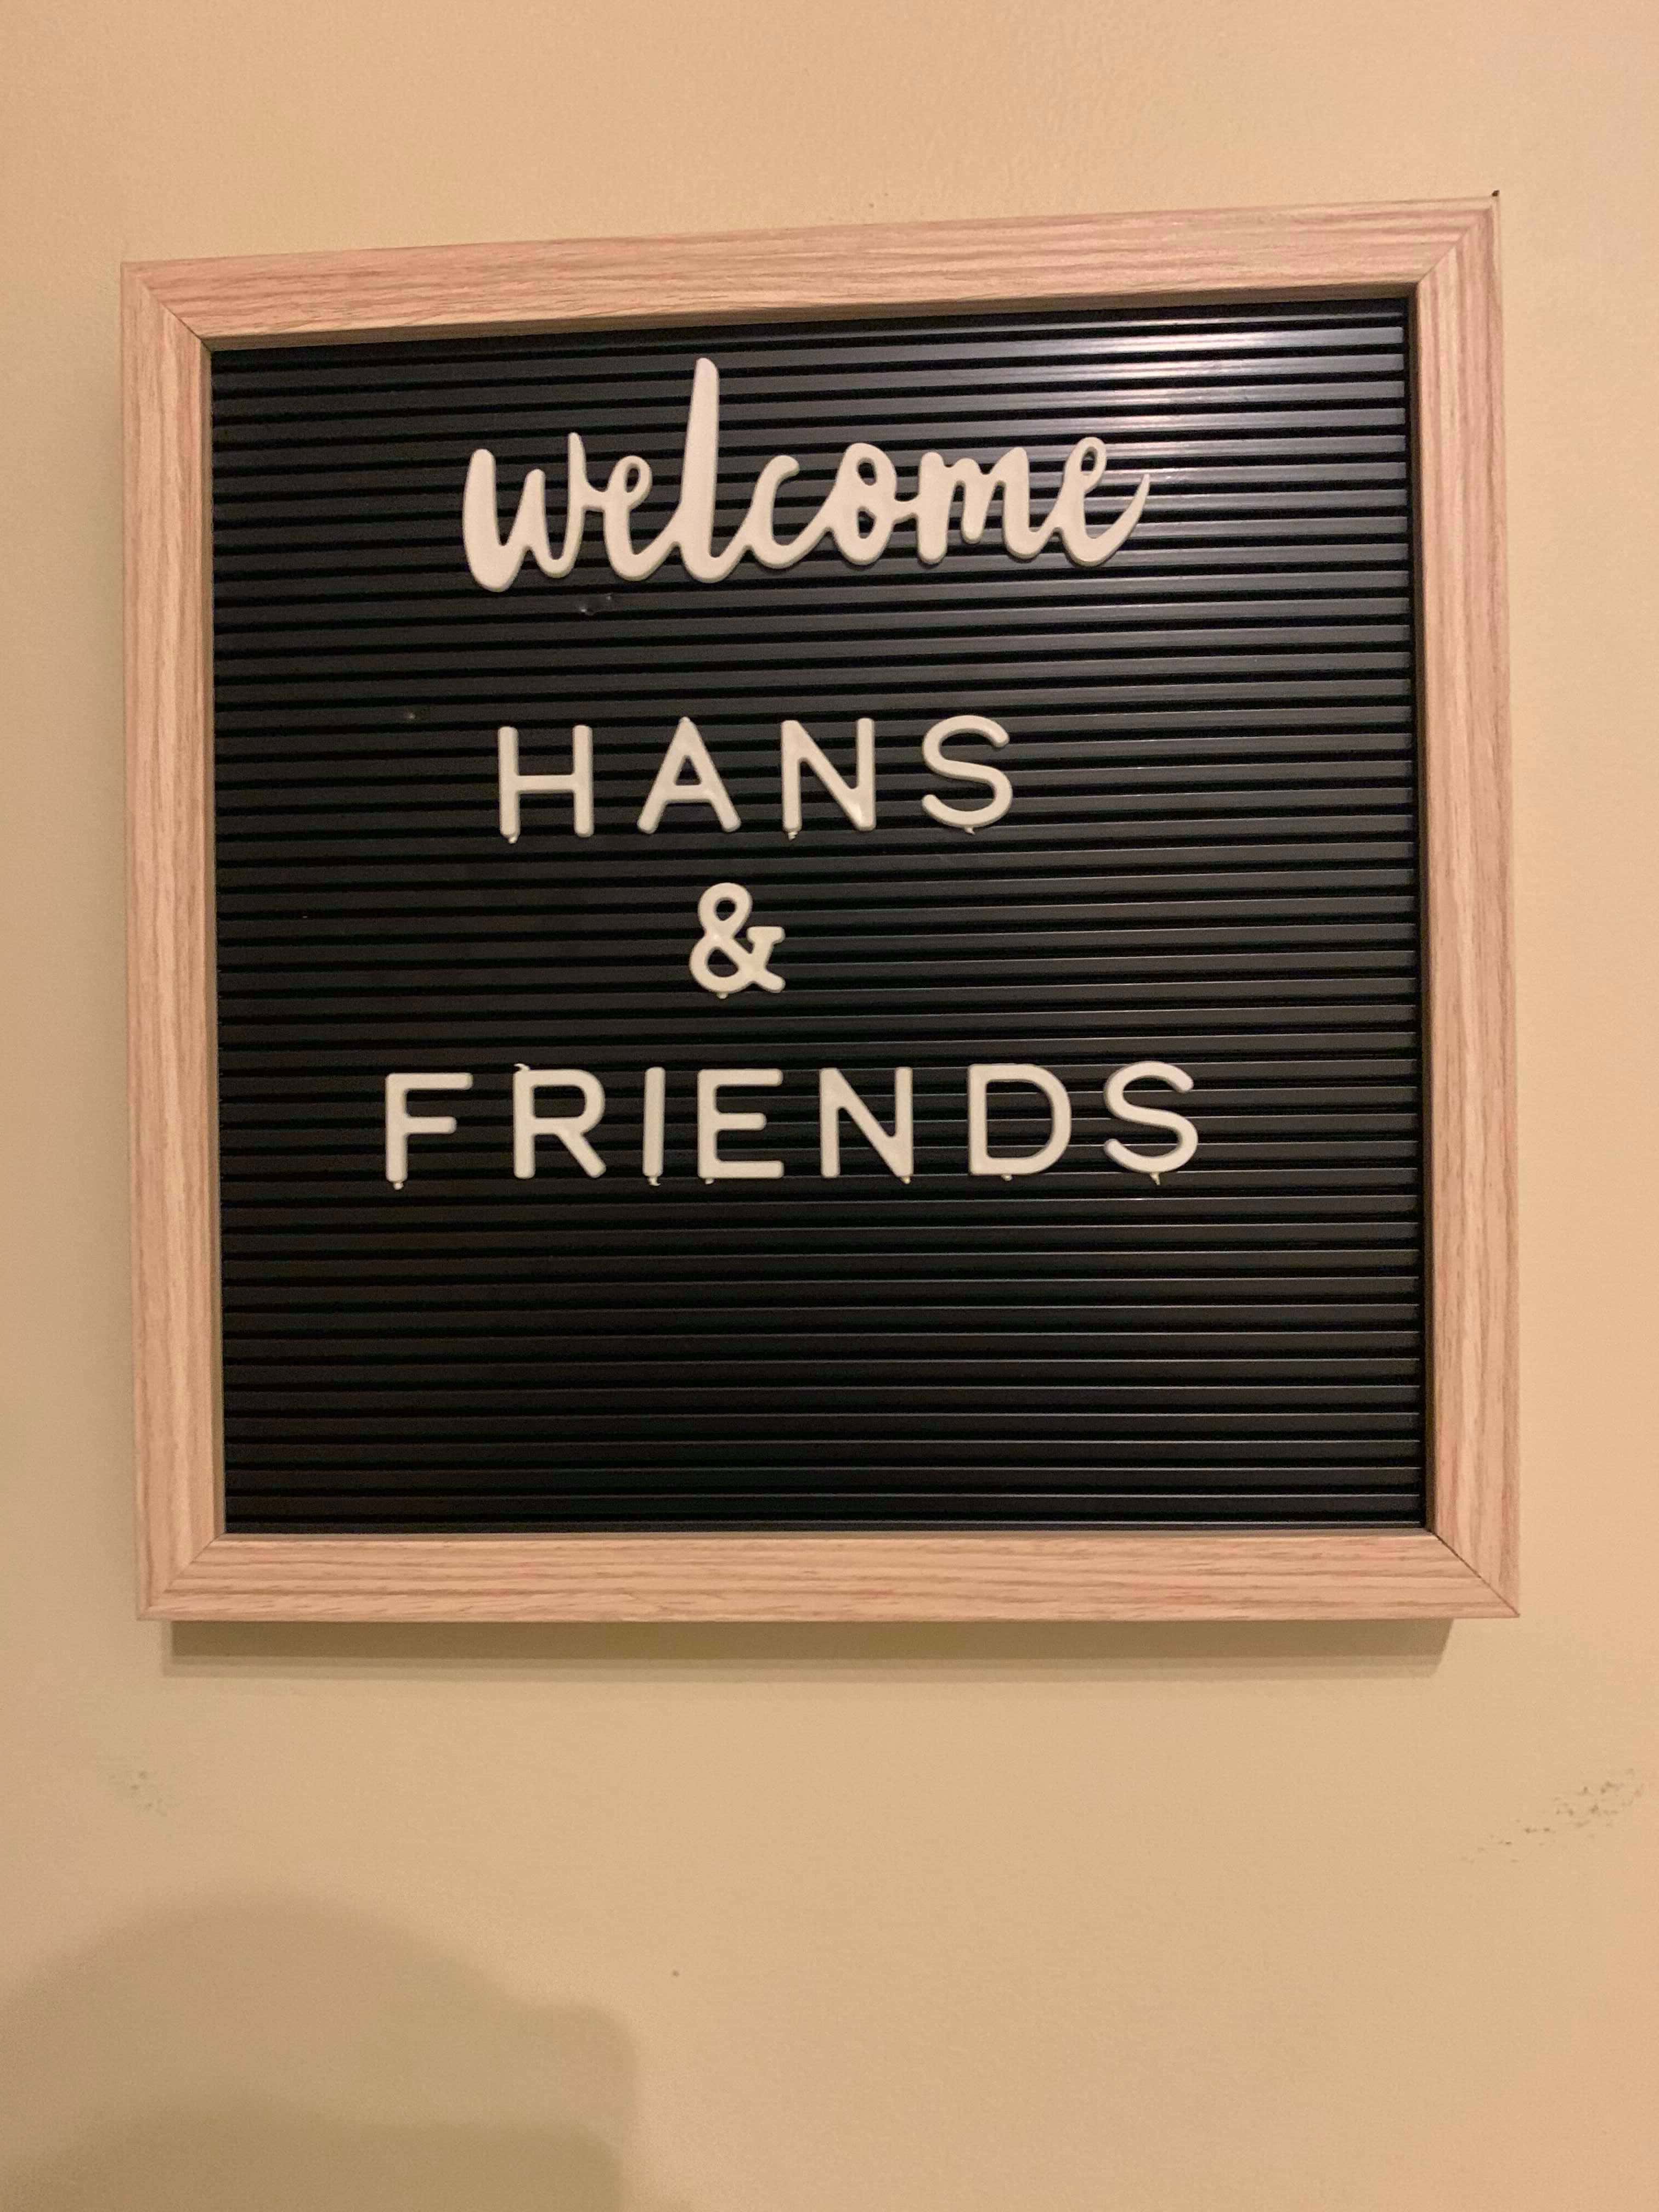 Welcome Hans & Friends board at our Airbnb